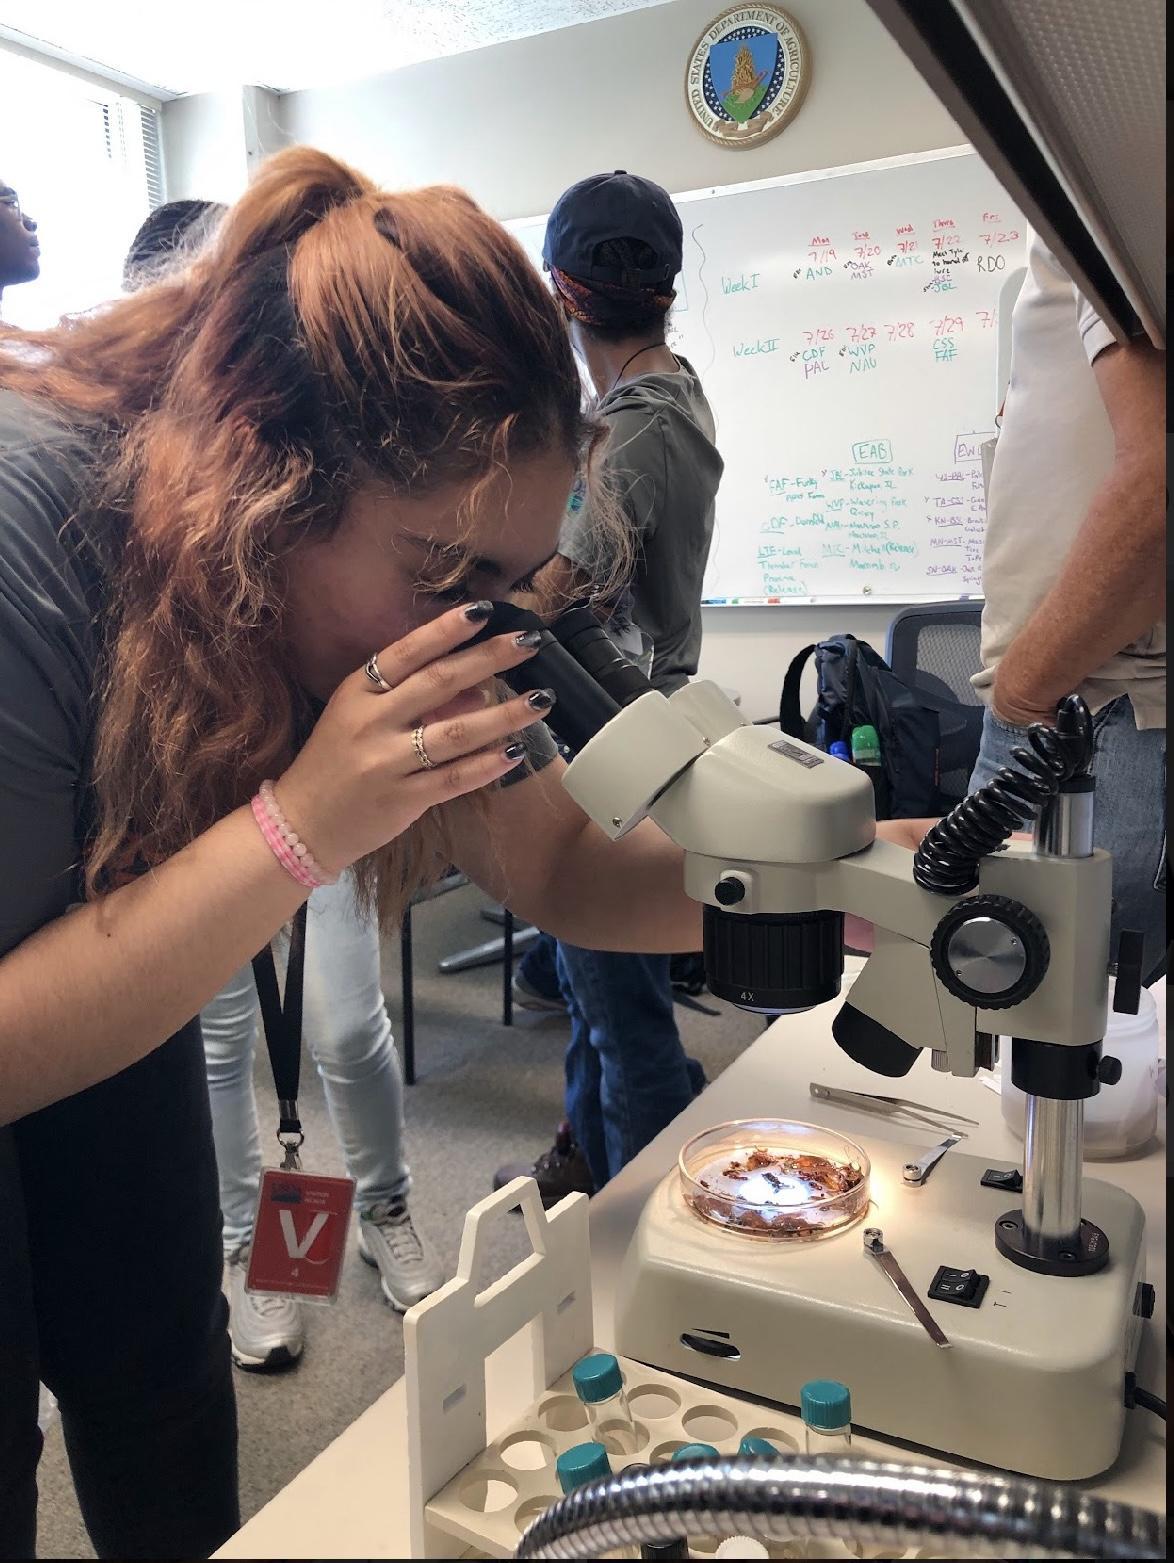 Harumi, a female student with brown/blonde hair is looking into a microscope. There are other students in the background.